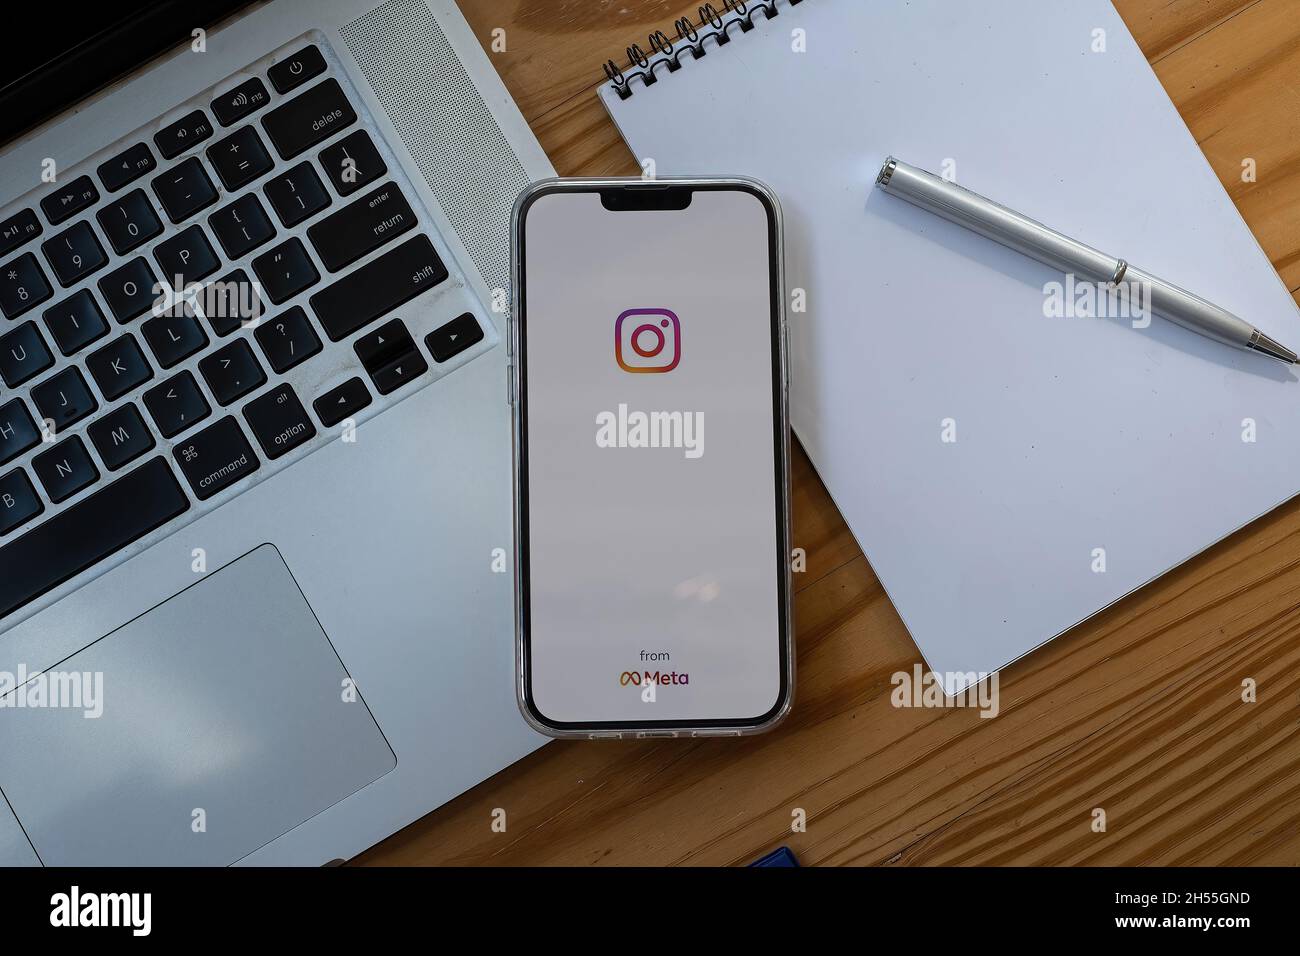 CHIANG MAI, THAILAND - NOV 07, 2021: iPhone 13 Pro Max with logo of instagram from meta. Instagram reels for making short videos and story. Stock Photo